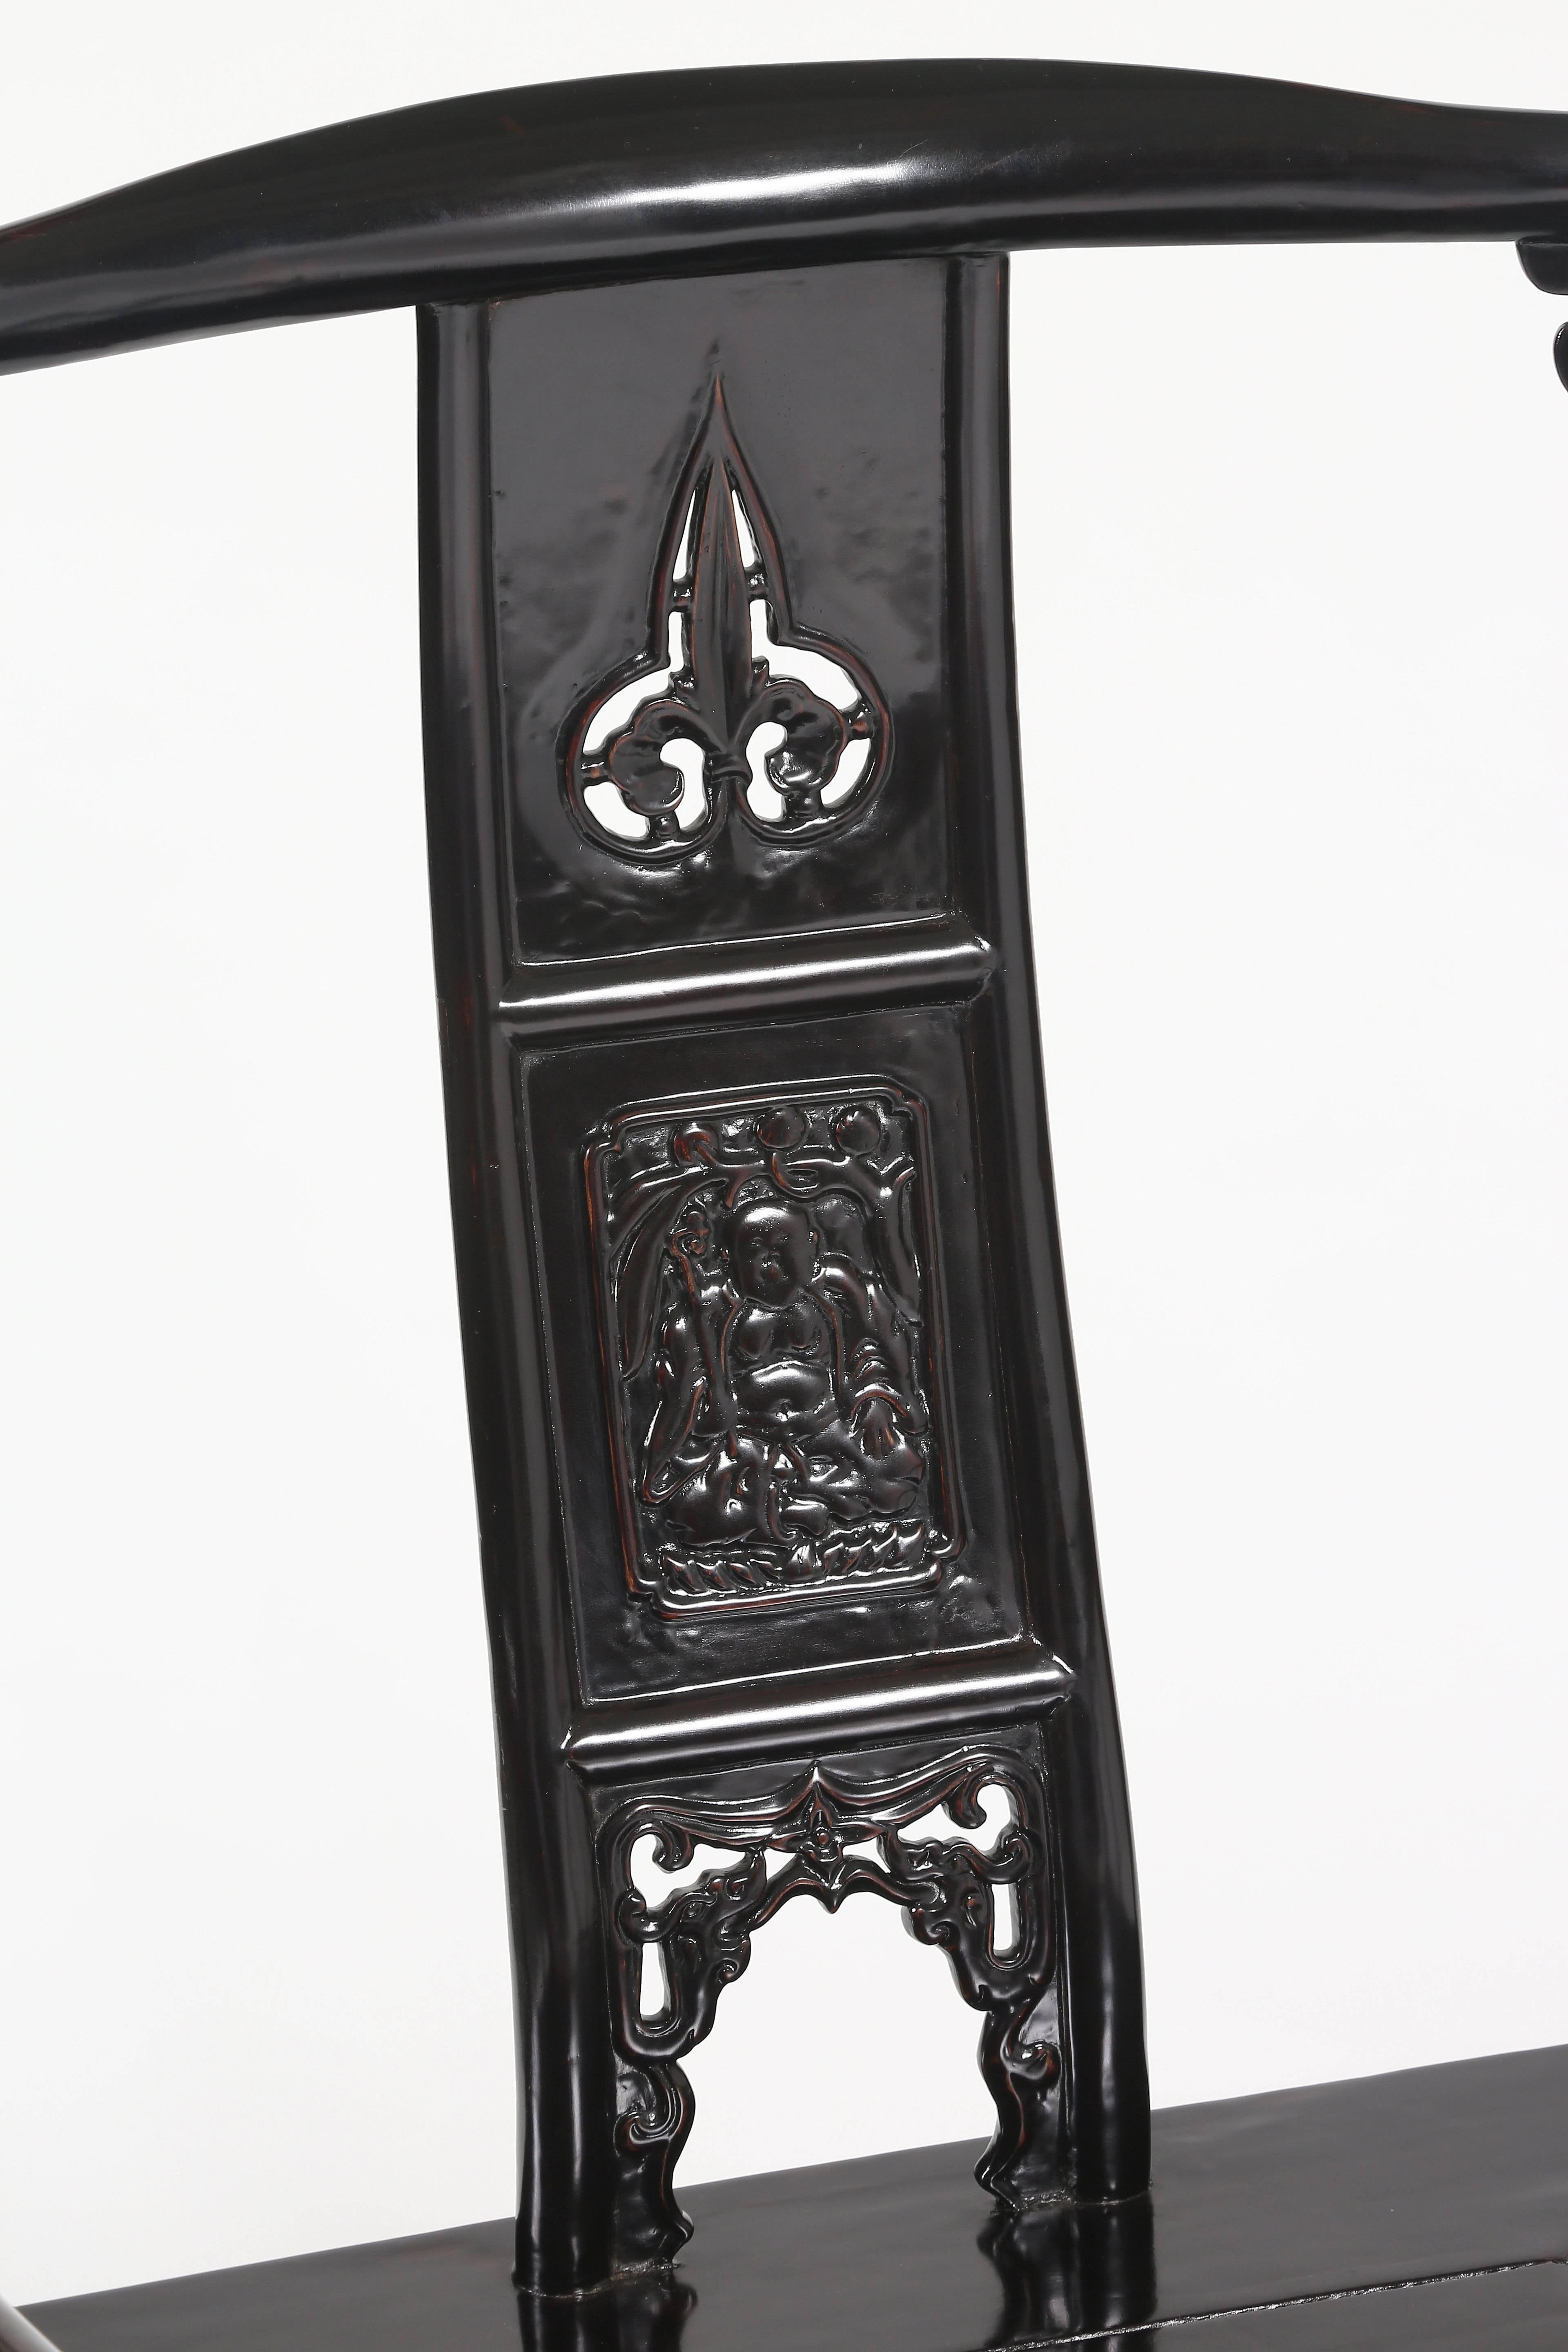 The shaped top rail supported on the side posts, decorated with carved cusped flanges, a S-curve back splat decorated in three sections, the top section open-carved with ruyi motif, the middle relief carved with a seated Buddha in mirror images on